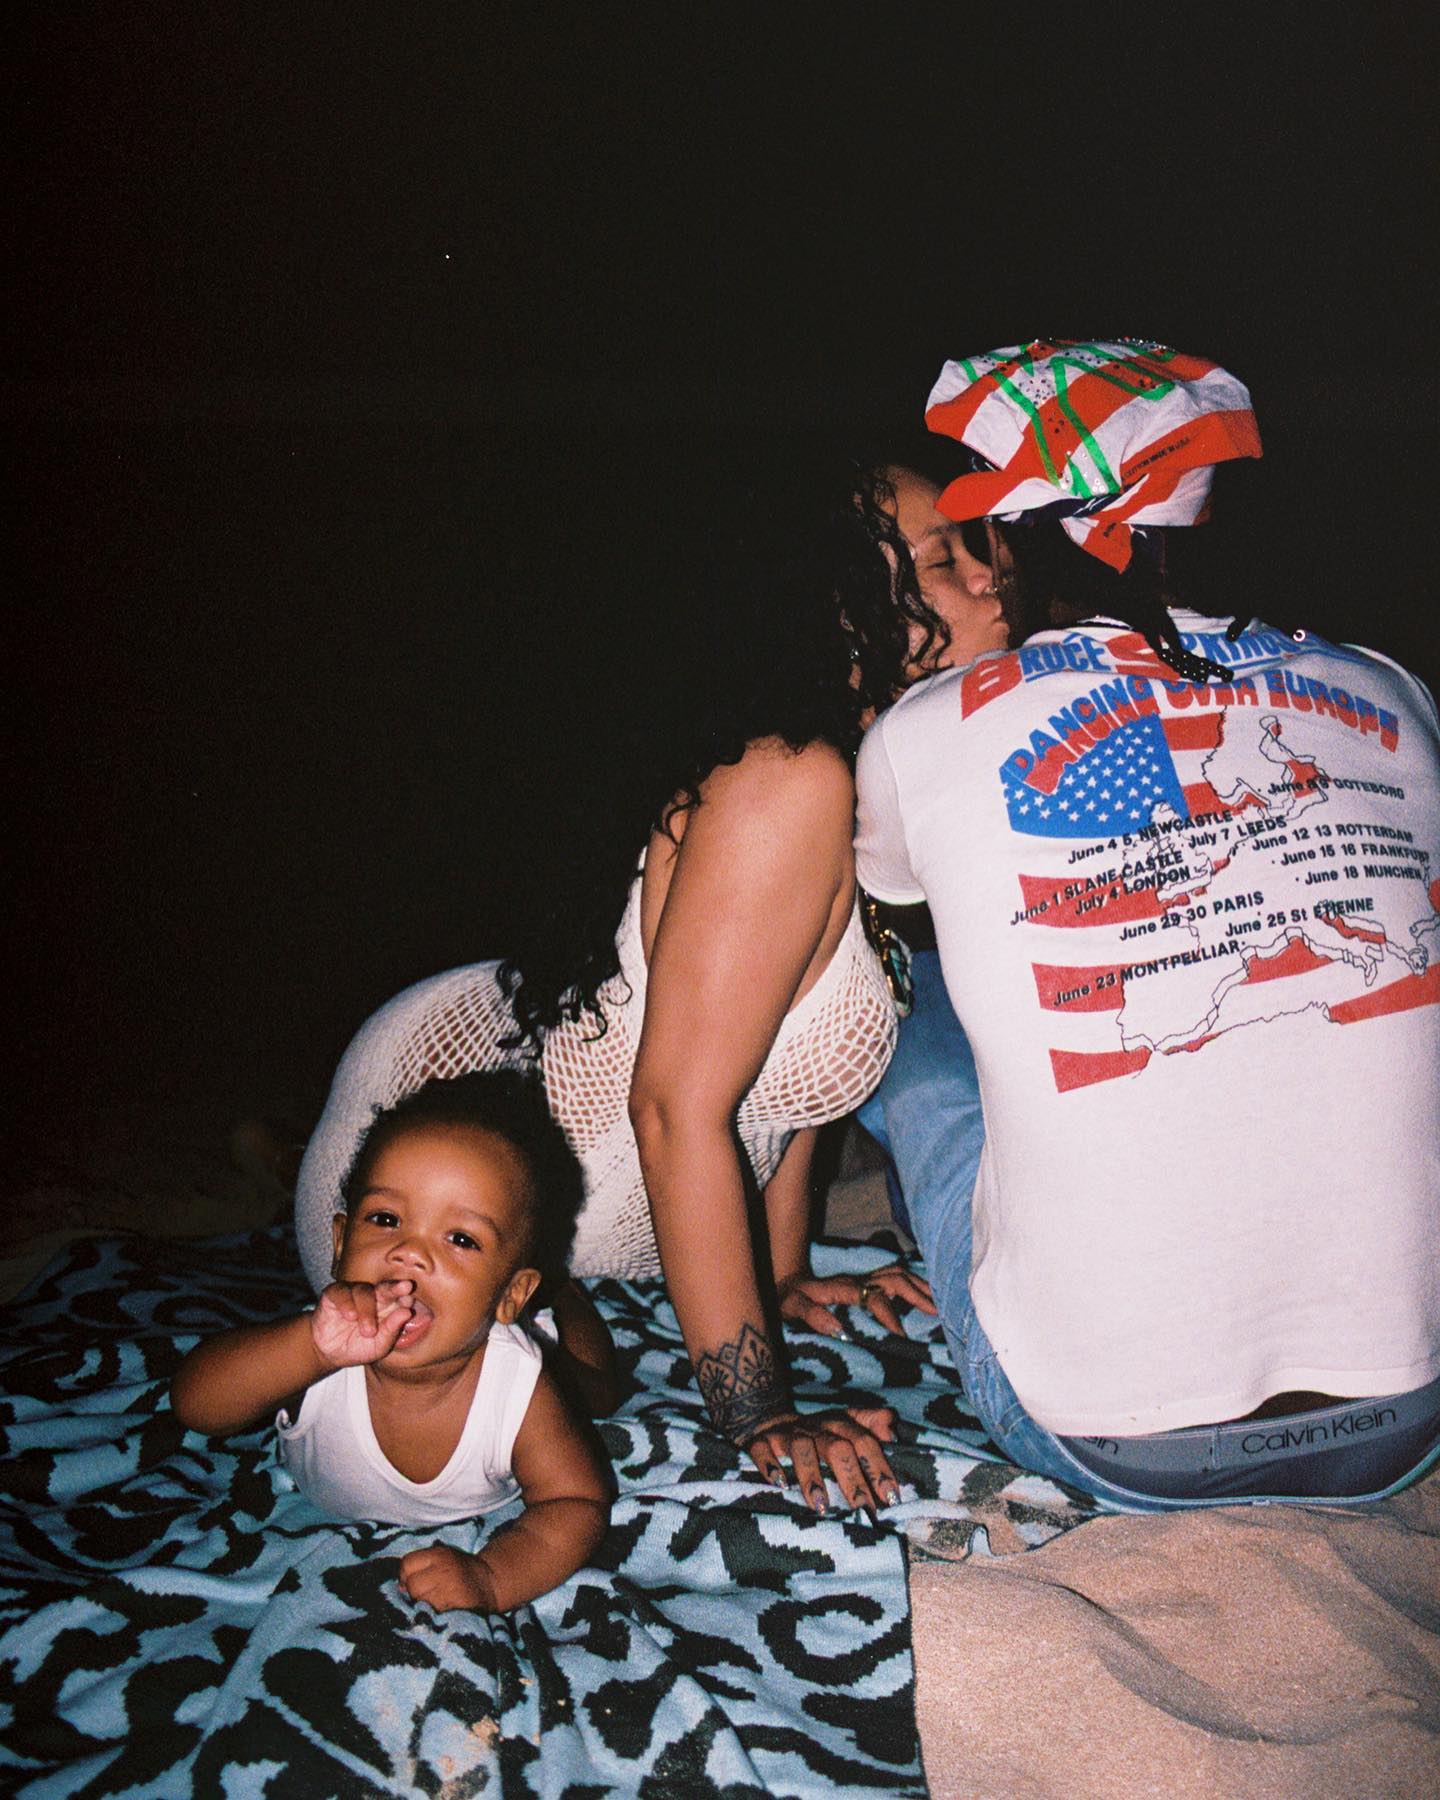 Rihanna and A$AP Rocky's kid RZA has the best baby sneakers in the universe